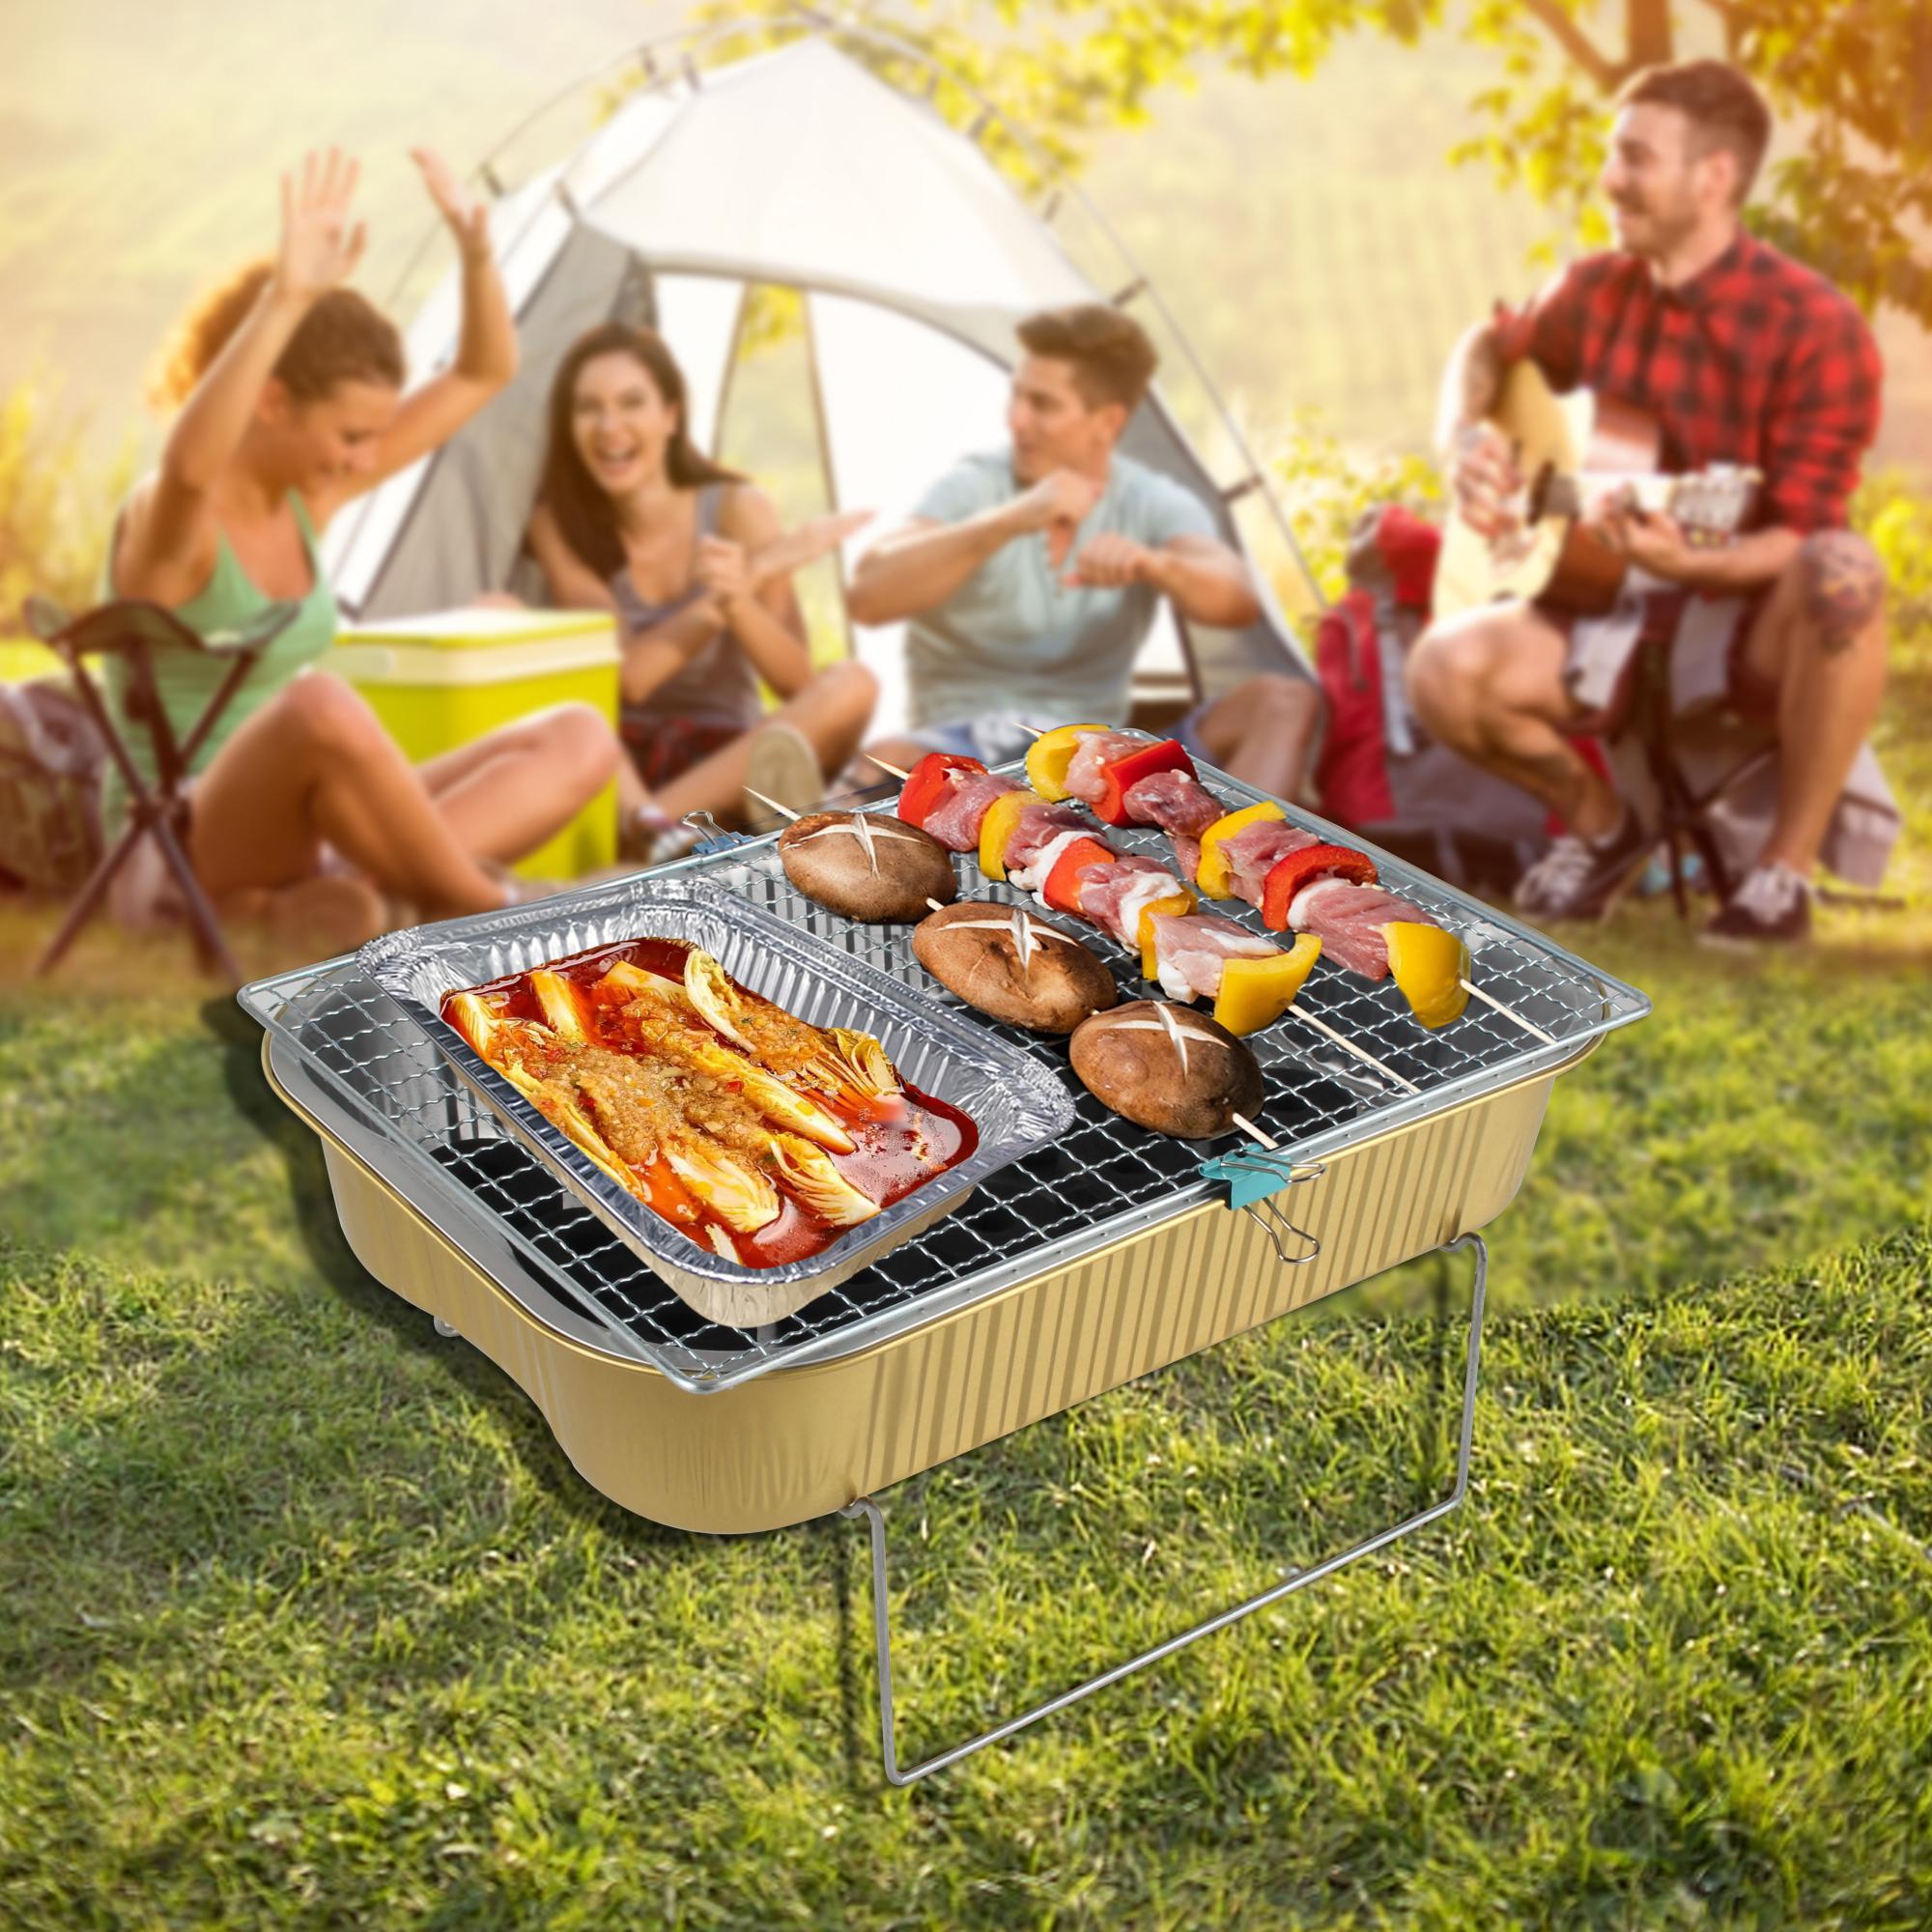 Portable Barbecue Grill for outside